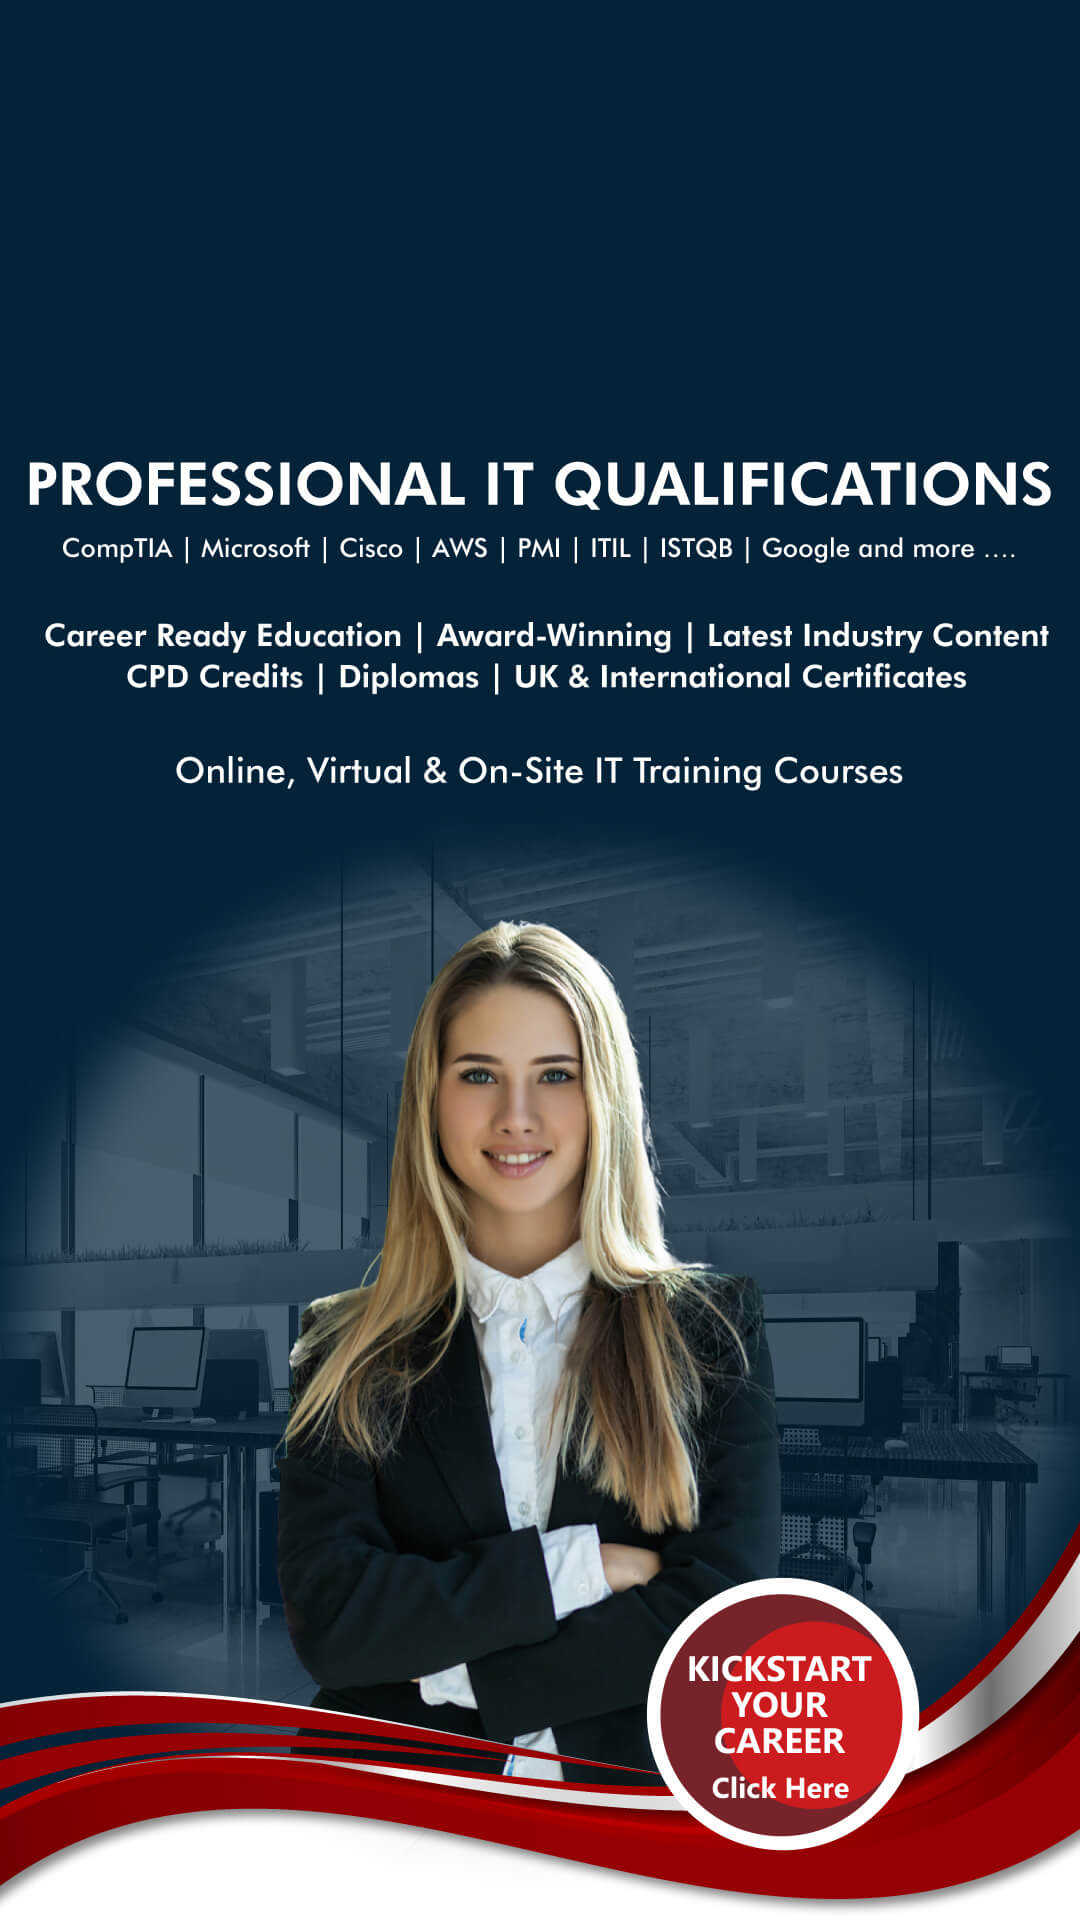 Online IT Training Courses through IT Academy UK CompTIA | Microsoft | Cisco | AWS | PMI | ITIL | ISTQB | Google | EC-Council | Linux | Prince2 | Oracle | ISACA | HRCI Free Course Demo